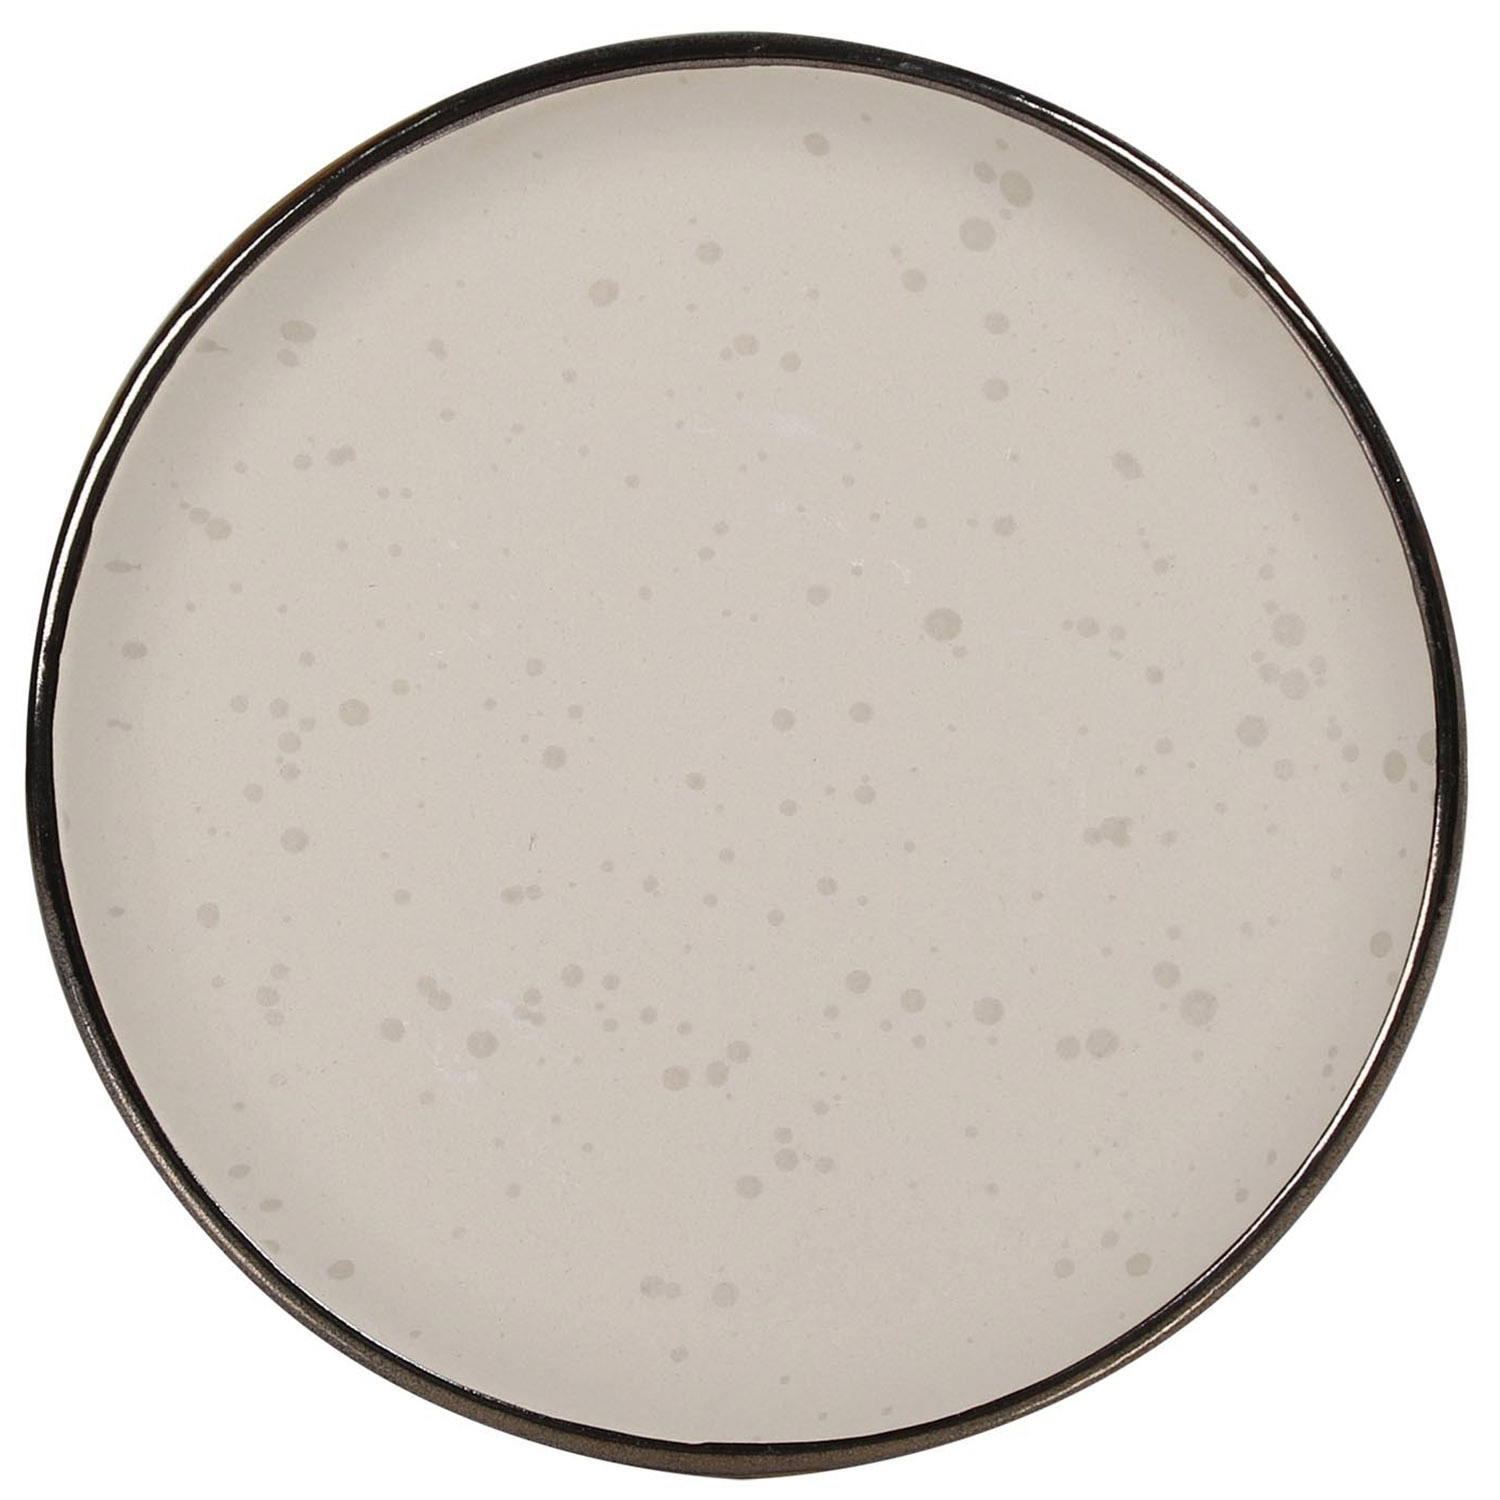 Omakase Stone Speckle Stoneware Side Plate Image